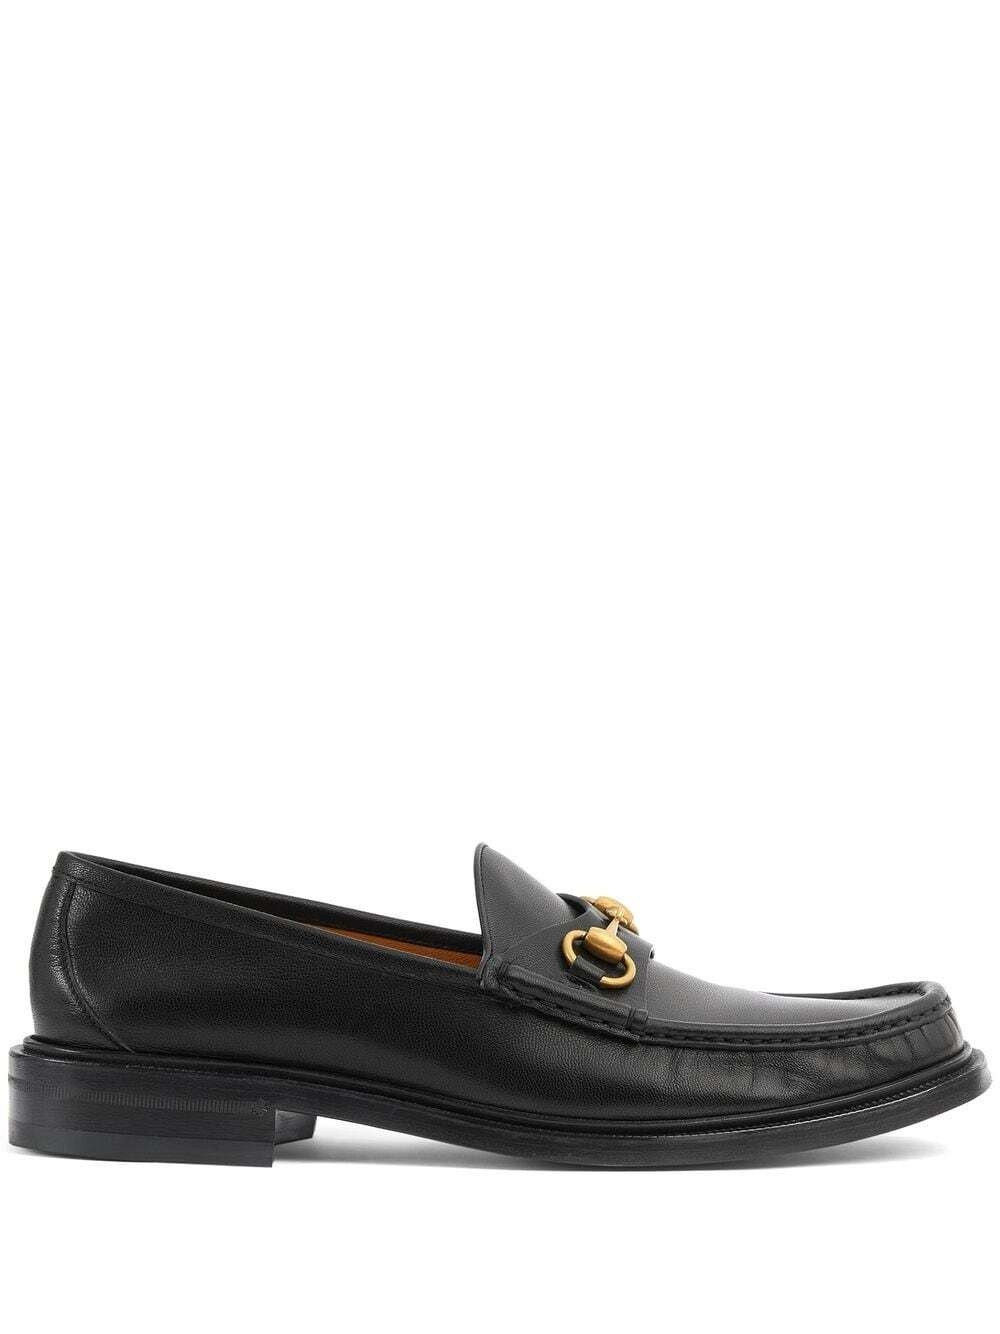 GUCCI - Jordan Leather Loafers Gucci